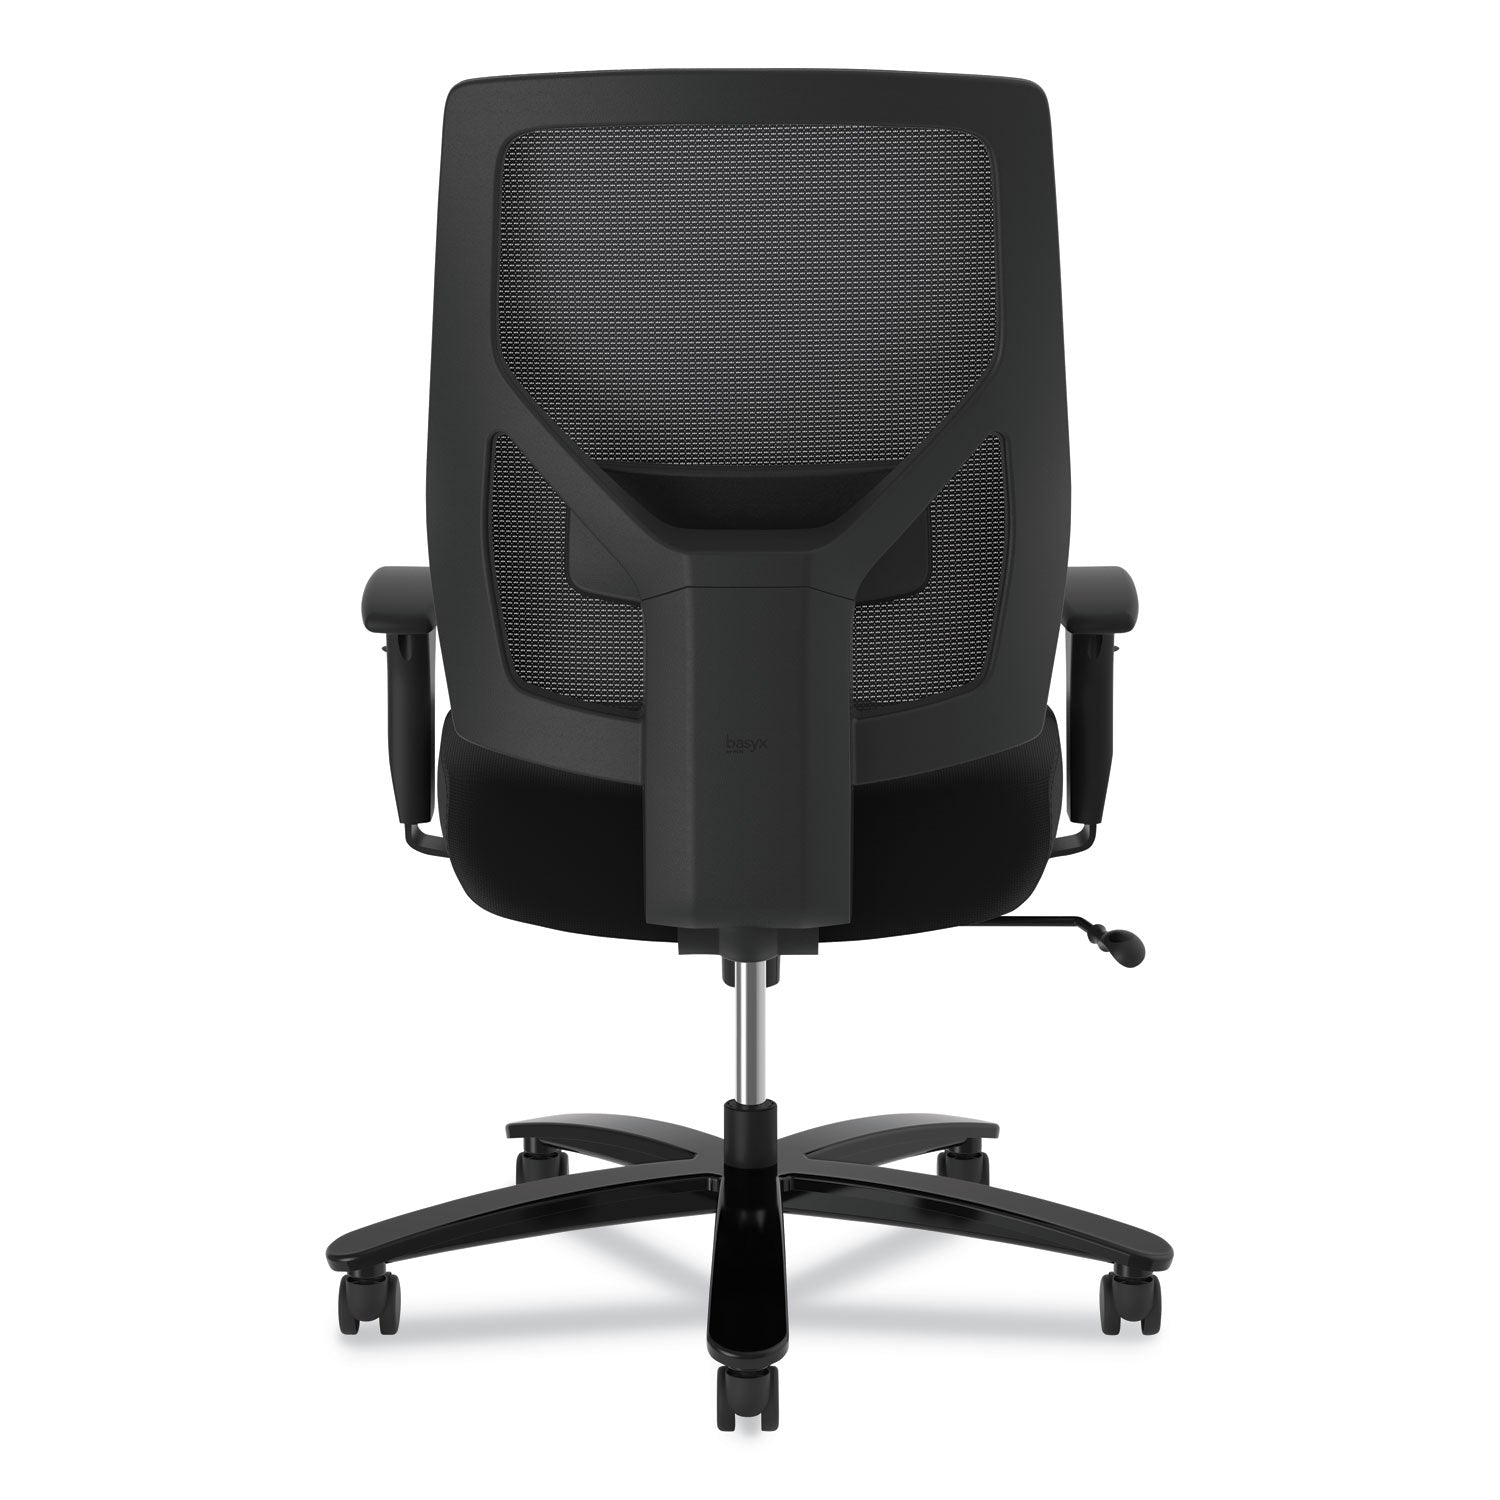 crio-big-and-tall-mid-back-task-chair-supports-up-to-450-lb-18-to-22-seat-height-black_bsxvl585es10t - 6